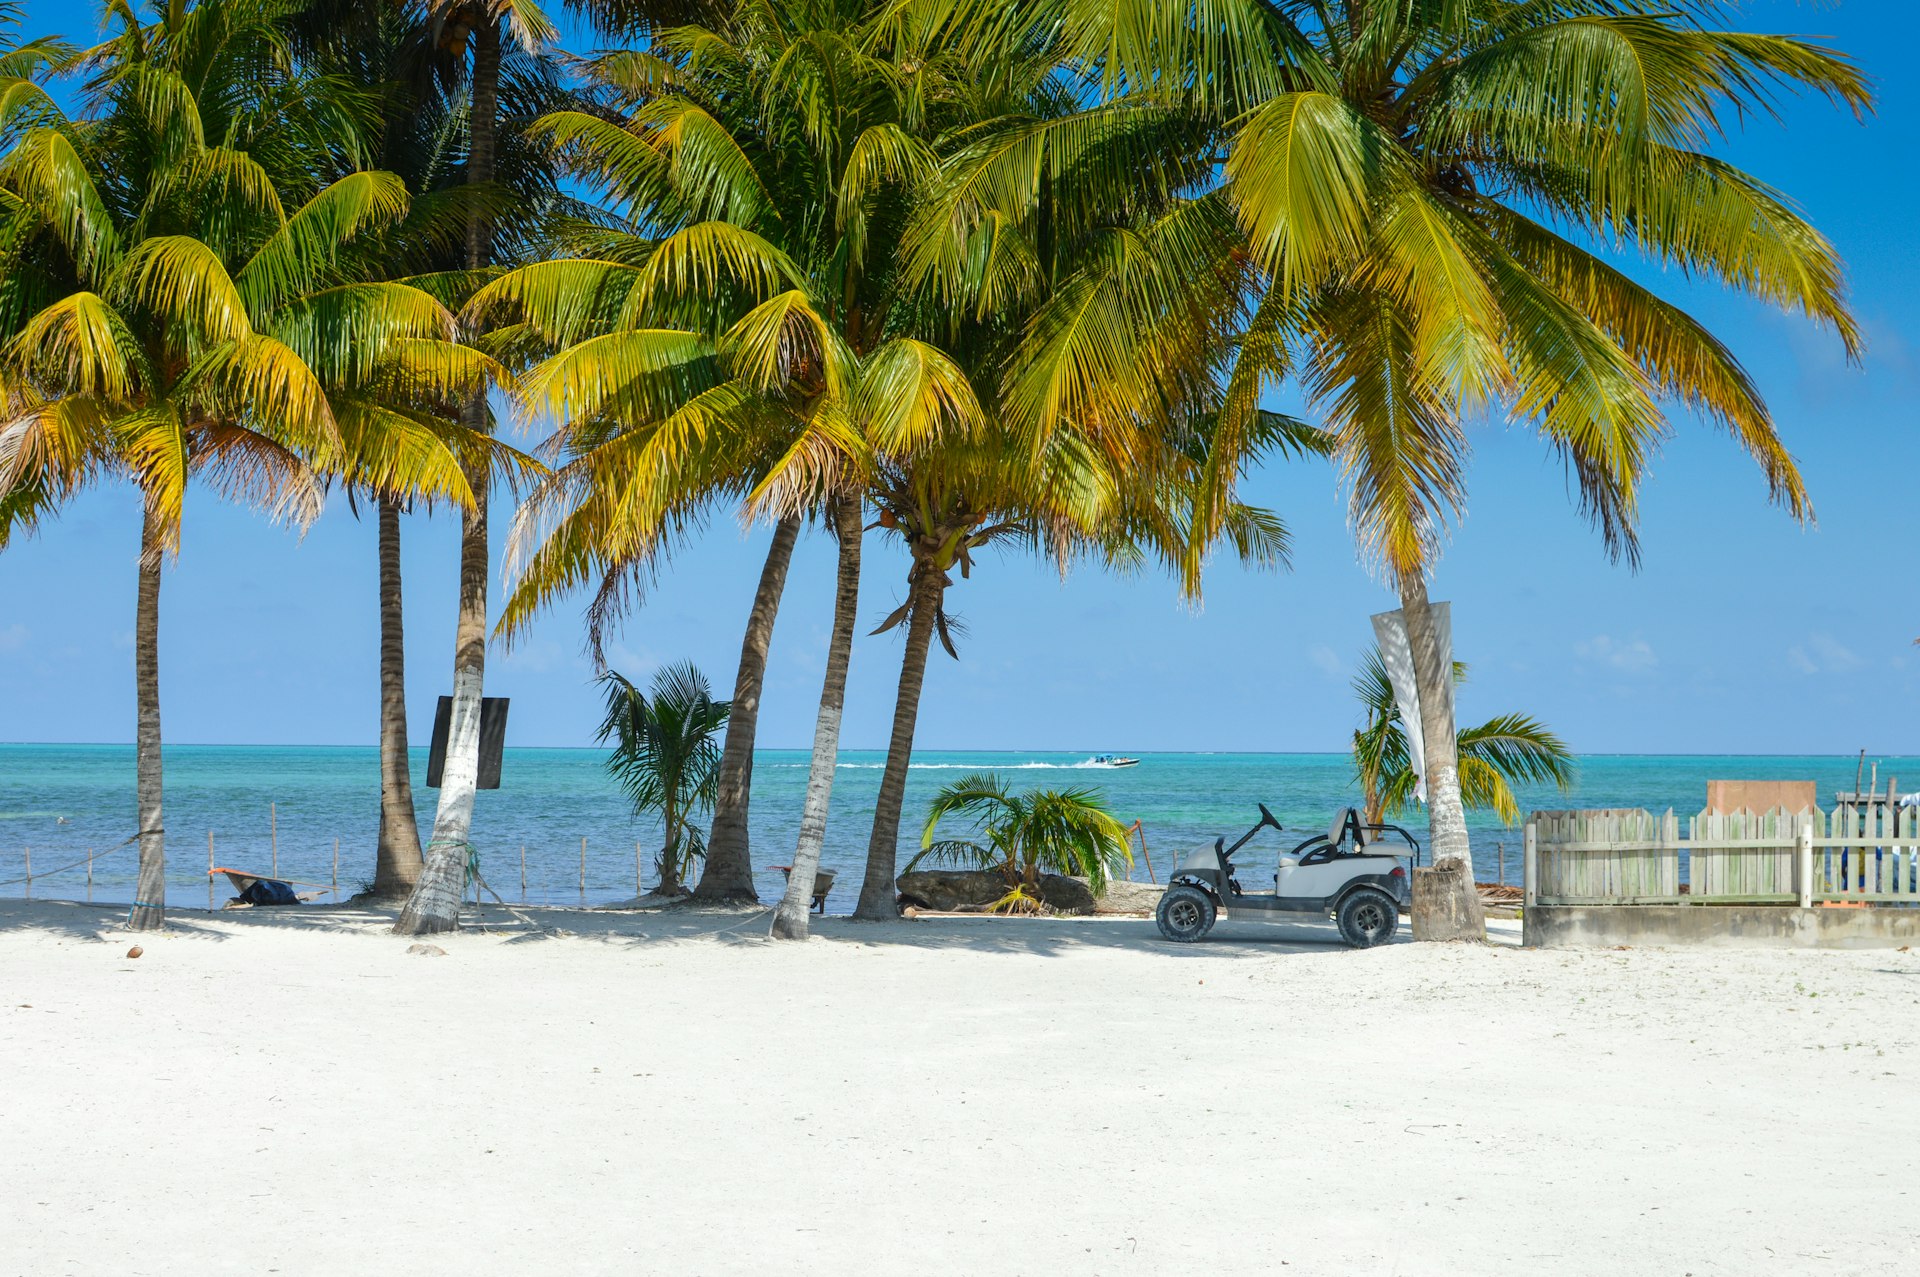 A small white golf cart is parked under palm trees on a beautiful beach backed by turquoise ocean